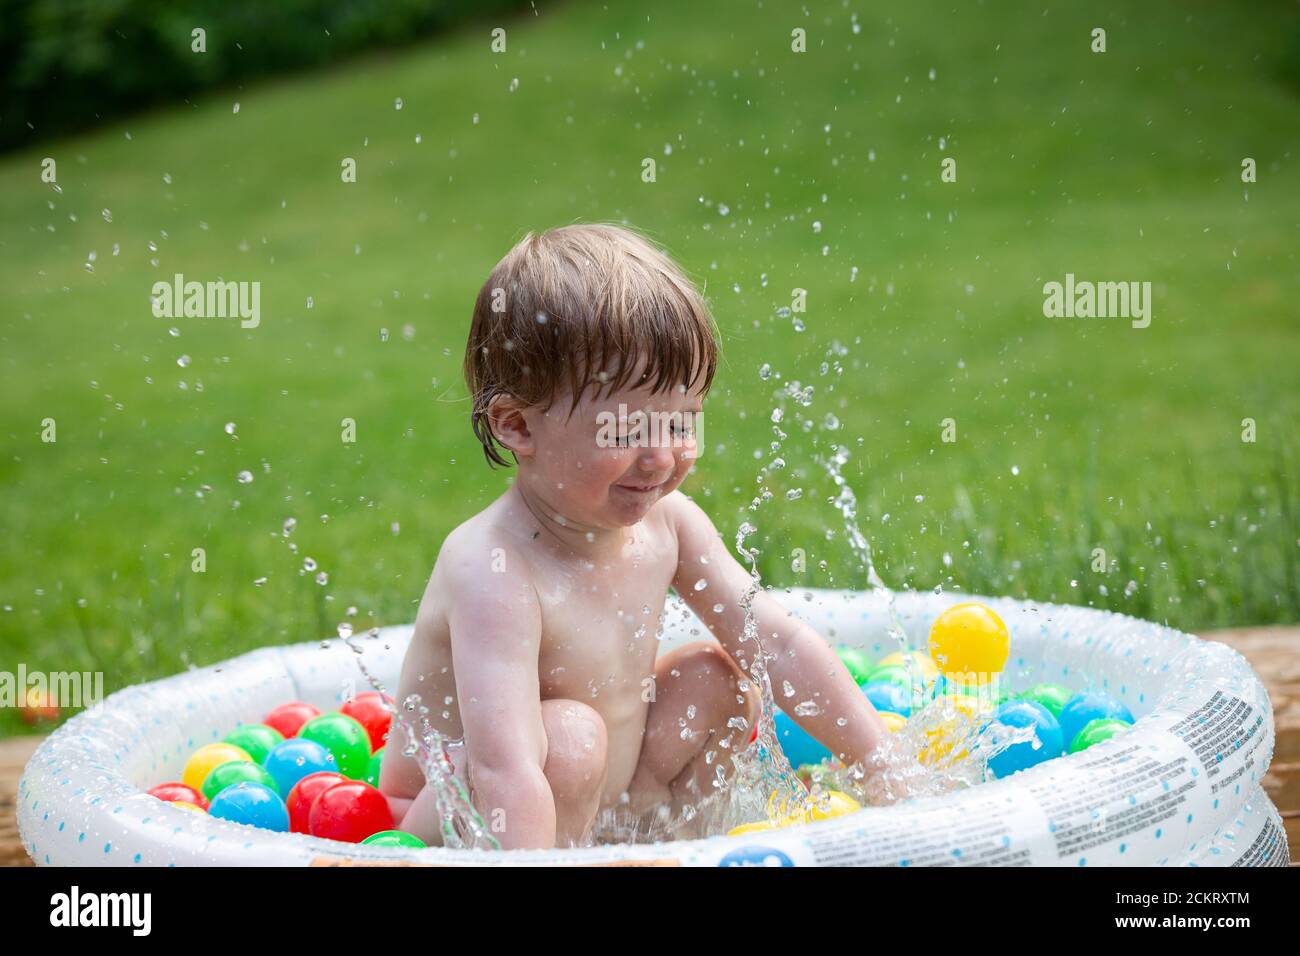 young boy splashing water in a tiny plastic pool outdoors in summer Stock Photo